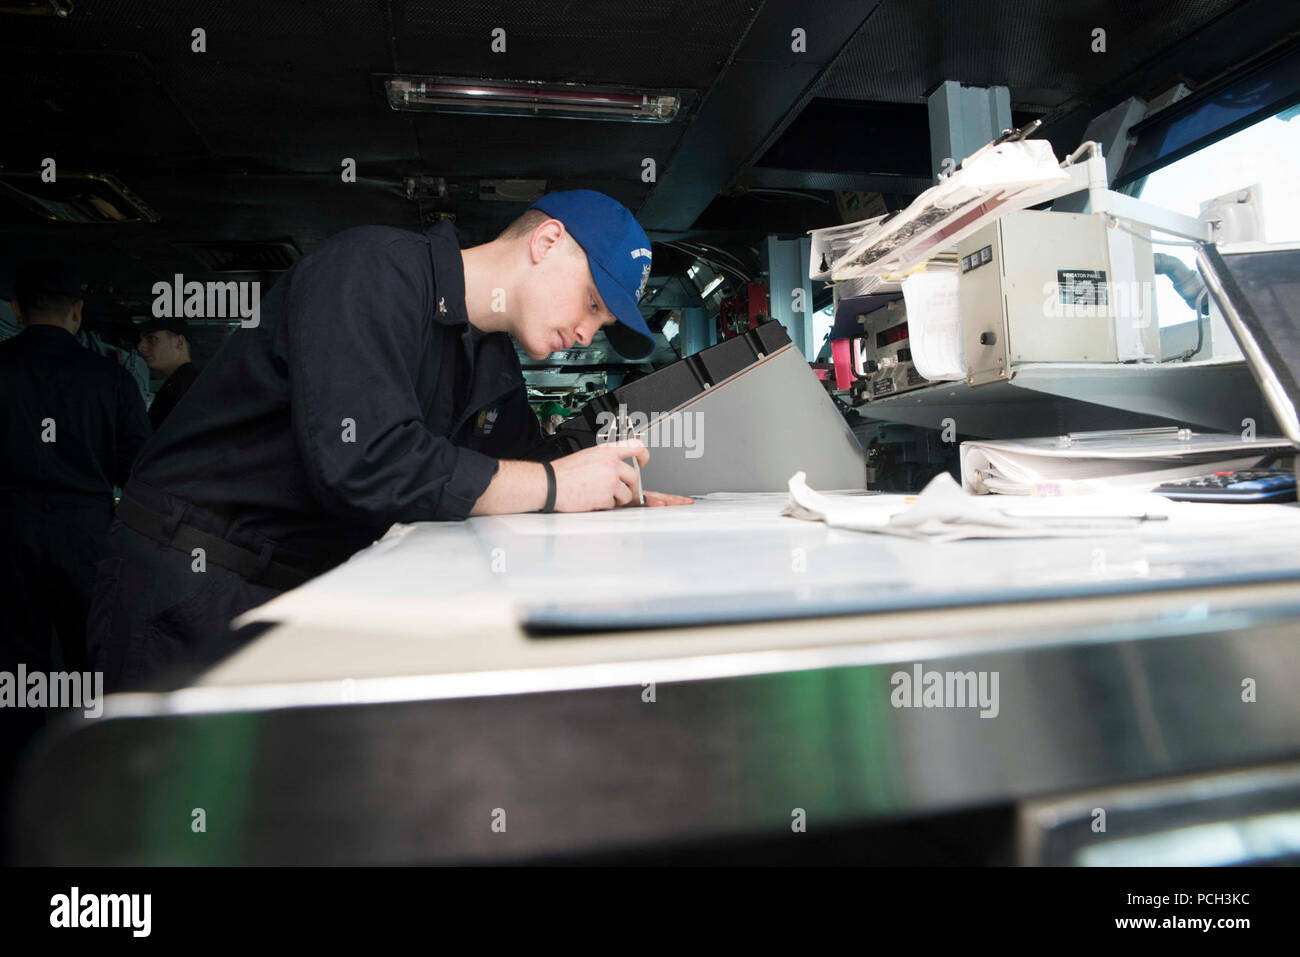 ATLANTIC OCEAN (Dec. 28, 2016) Quartermaster 3rd Class Jesse Sutton, from Dekalb County, Tenn., plots a map on the navigational bridge aboard the aircraft carrier USS Dwight D. Eisenhower (CVN 69). The carrier, currently deployed as part of the Eisenhower Carrier Strike Group, is conducting naval operations in the U.S. 6th Fleet area of operations in support of U.S. national security interests in Europe. Stock Photo